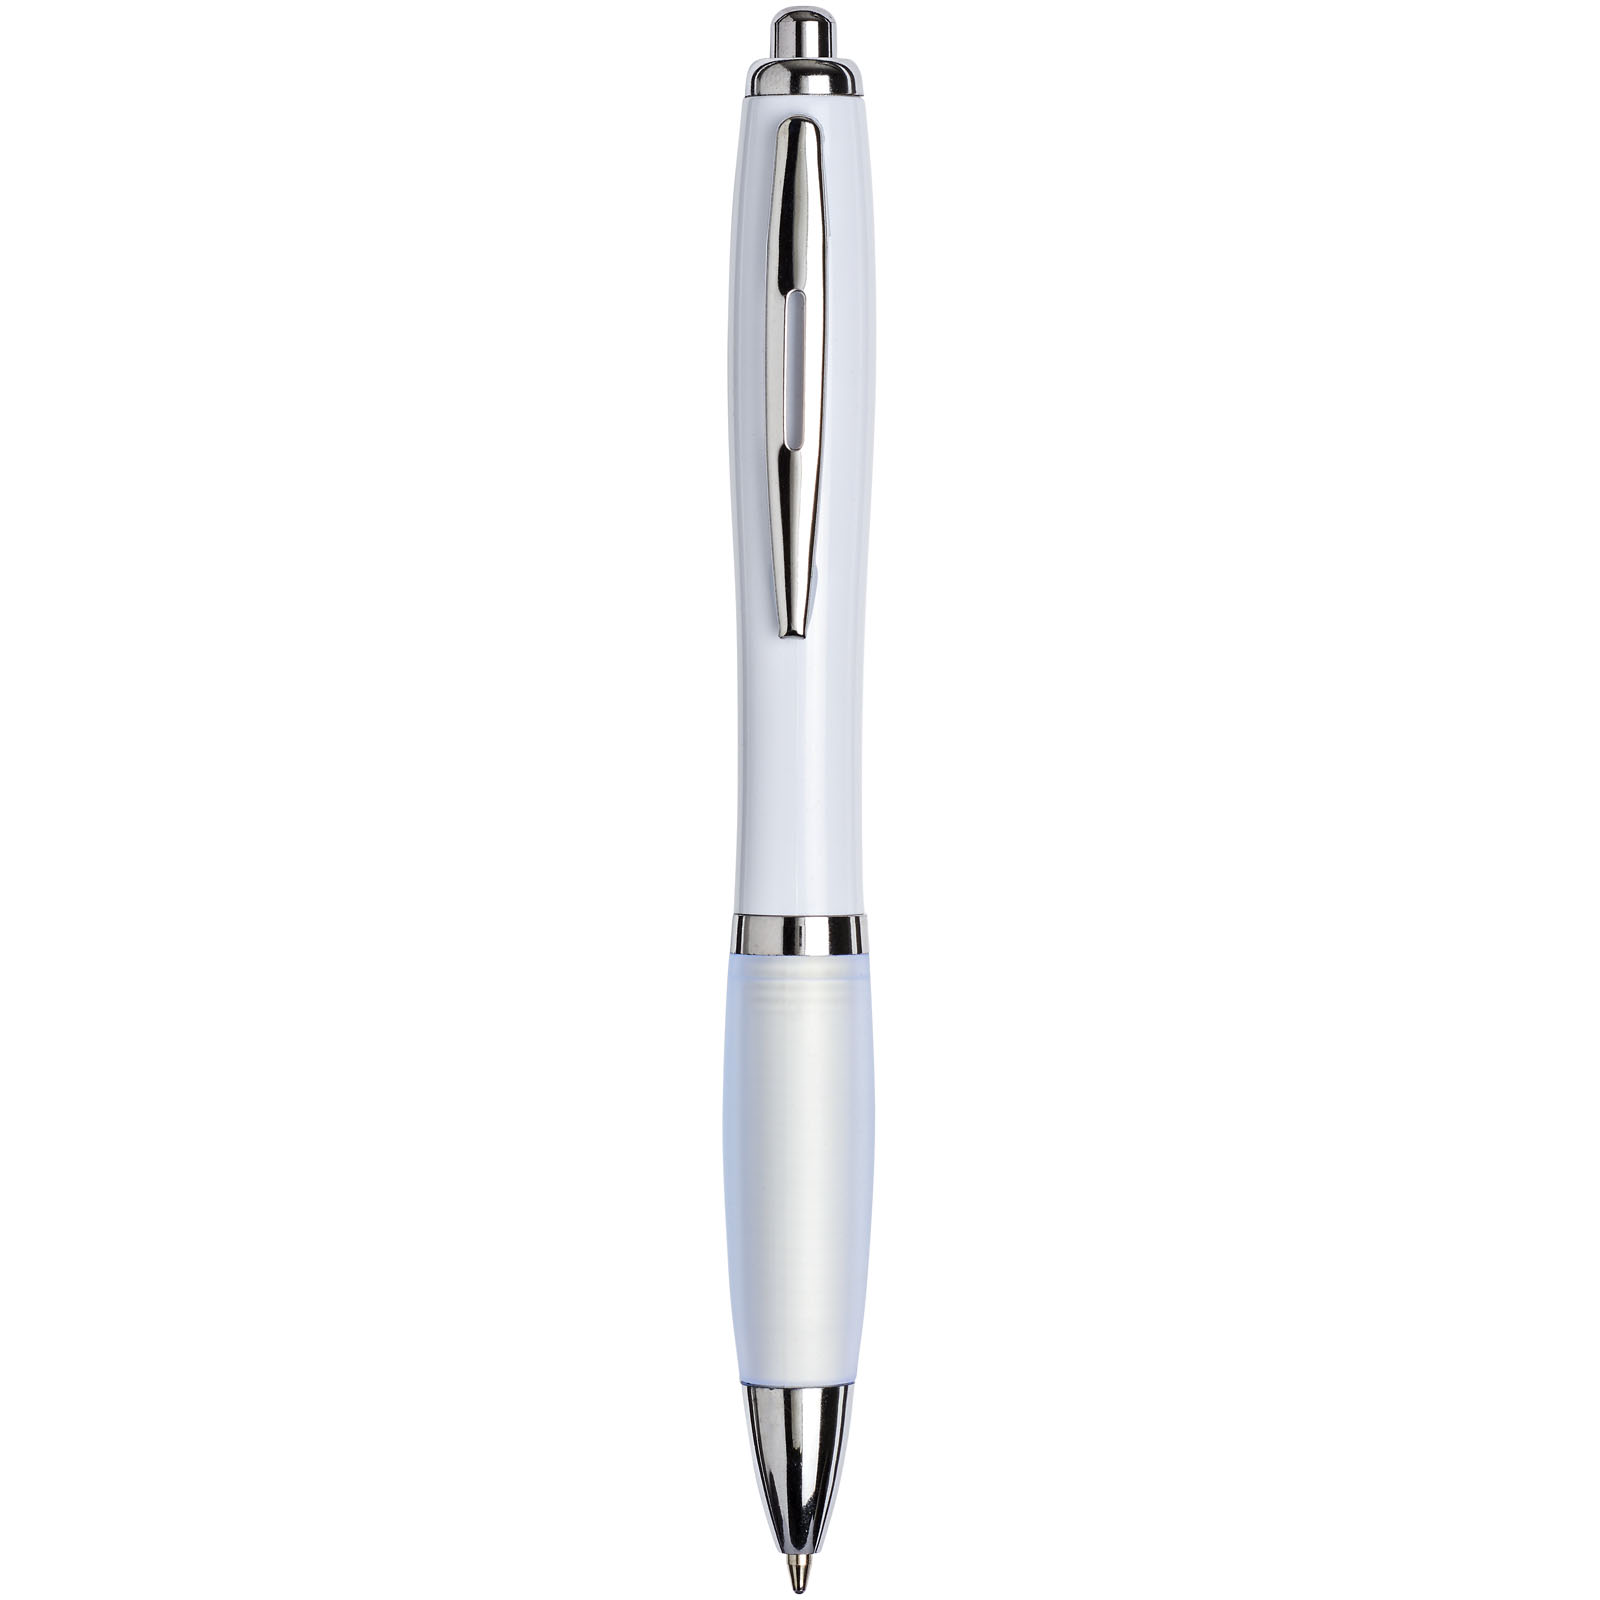 This is a Nash ballpoint pen featuring a colored barrel and grip. - Barham Woods